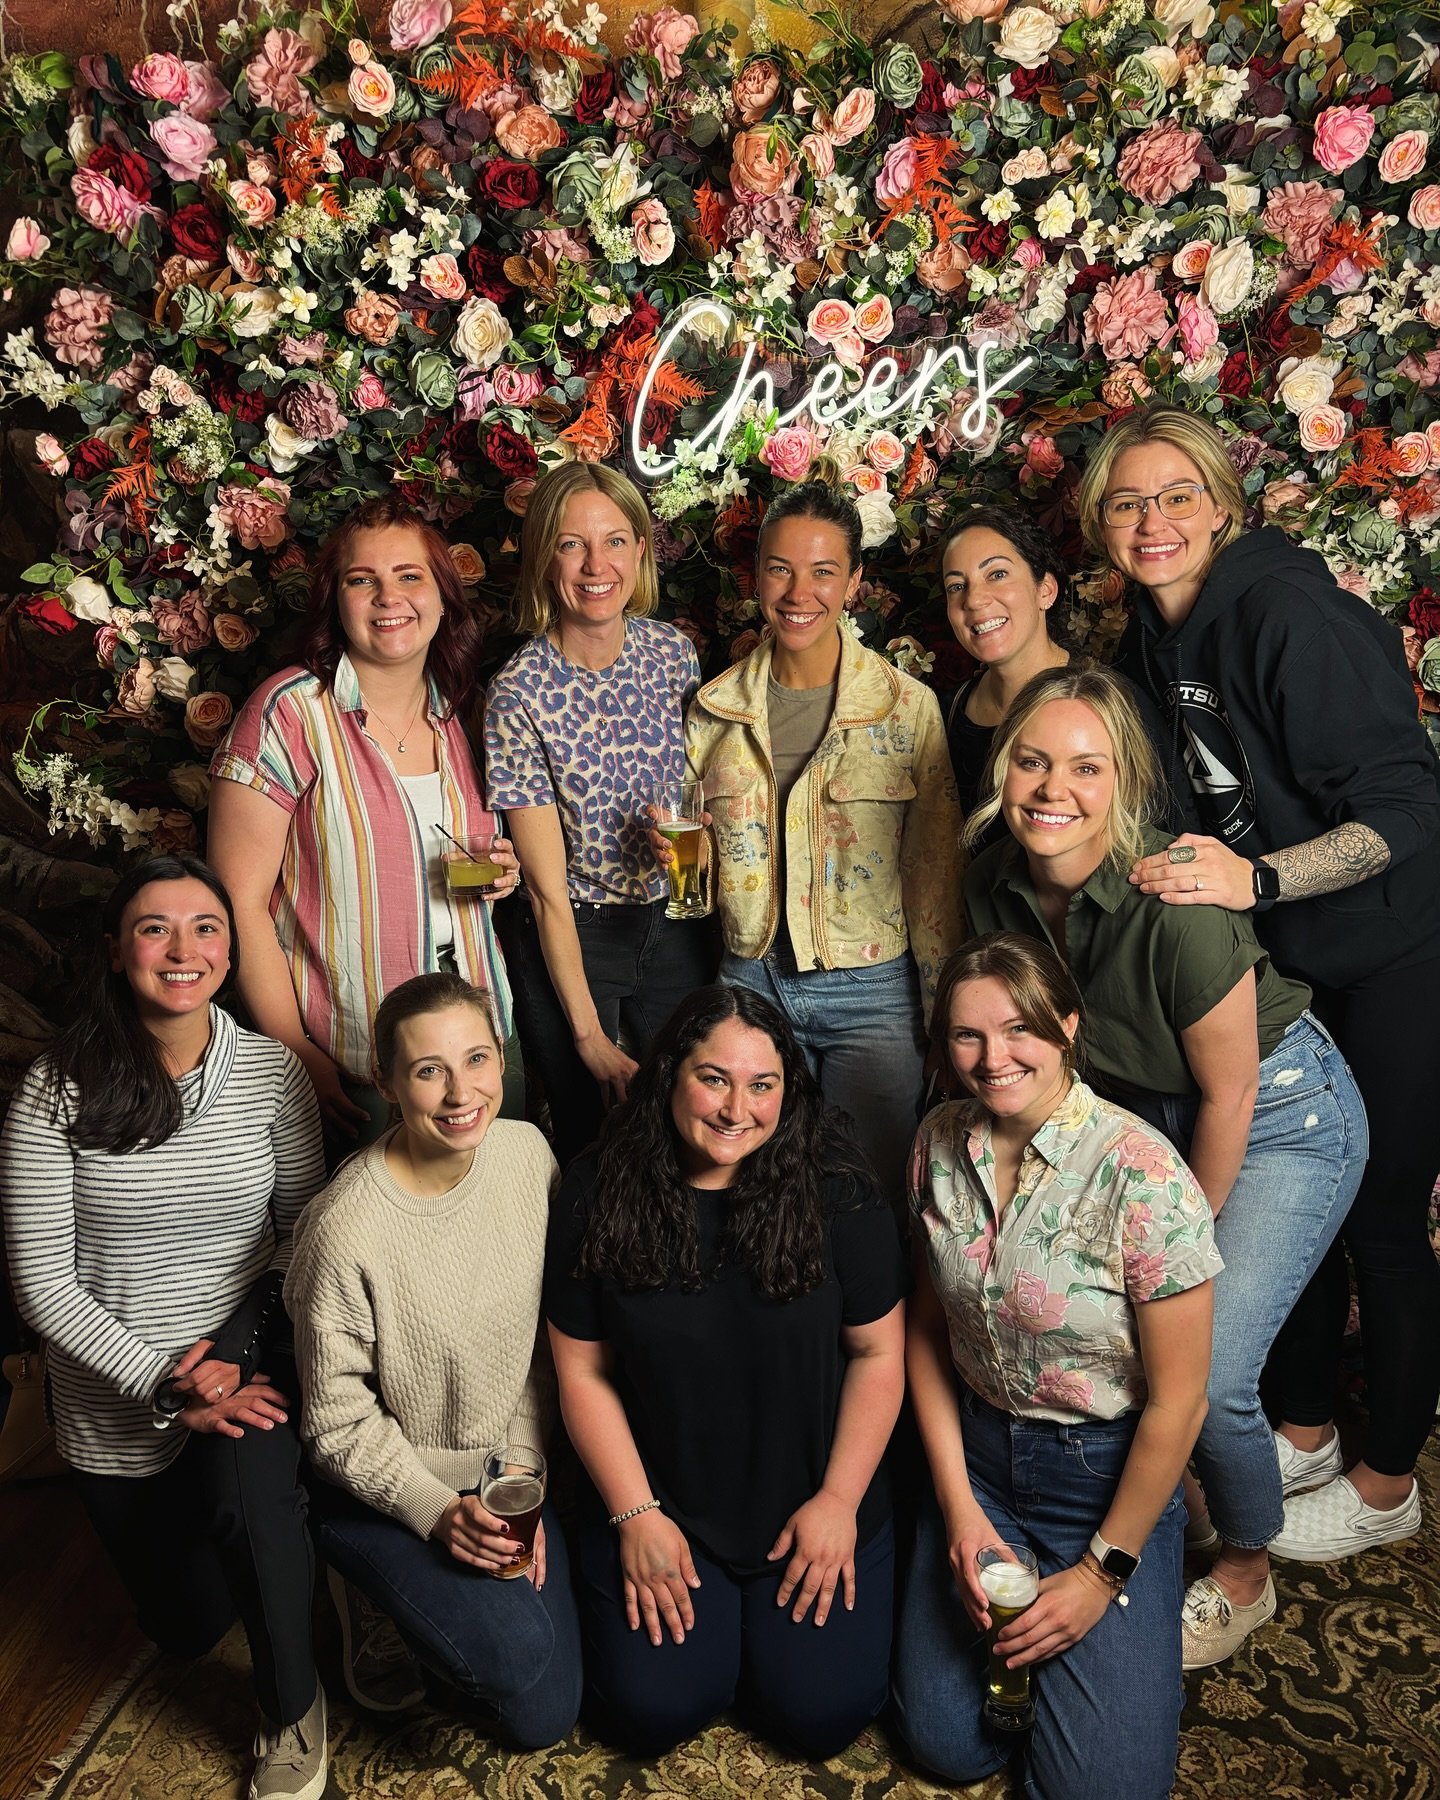 Cheers-ing to this fab crew! Thanks @castlerockfamilies and @goldielinksjewelry for having our team at the Castle Rock Bloom Bazaar 🌸
.
.
.
.
#strakapediatrictherapies #pediatrictherapies #therapycenter #speechtherapy #slp #speechlanguagepathology #